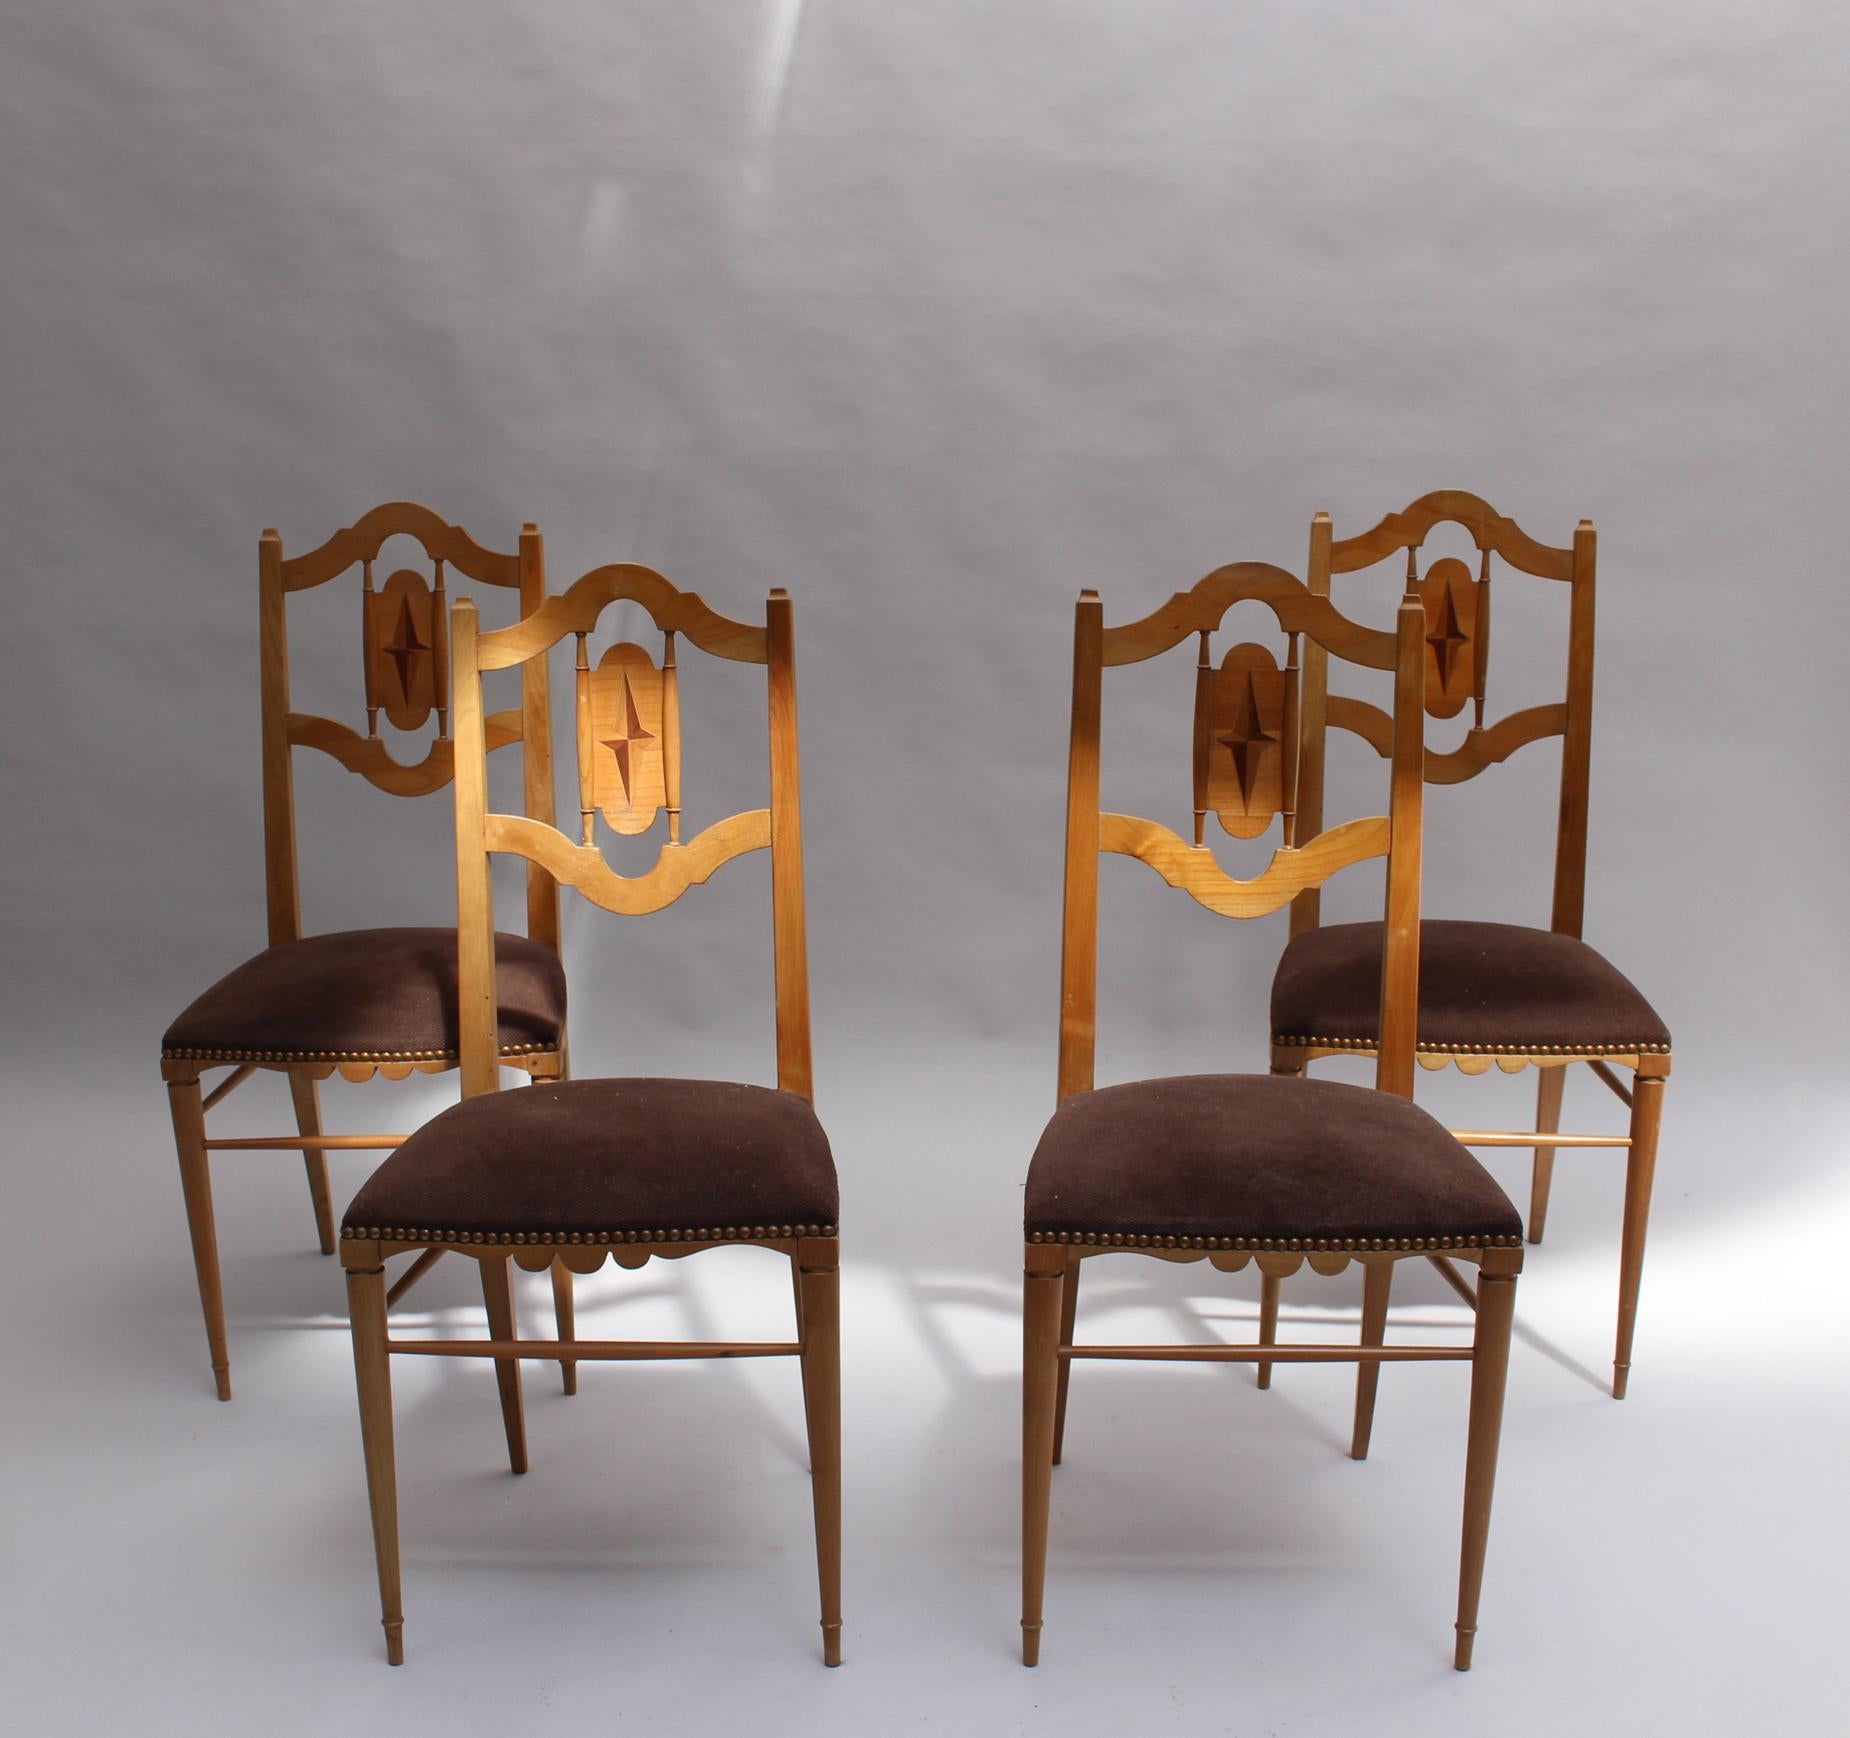 A set of four French 20s-30s cherry wood chairs with openwork backs and geometrical inlaid marquetry with a carved base and tapered legs.
Stamped on two chairs.